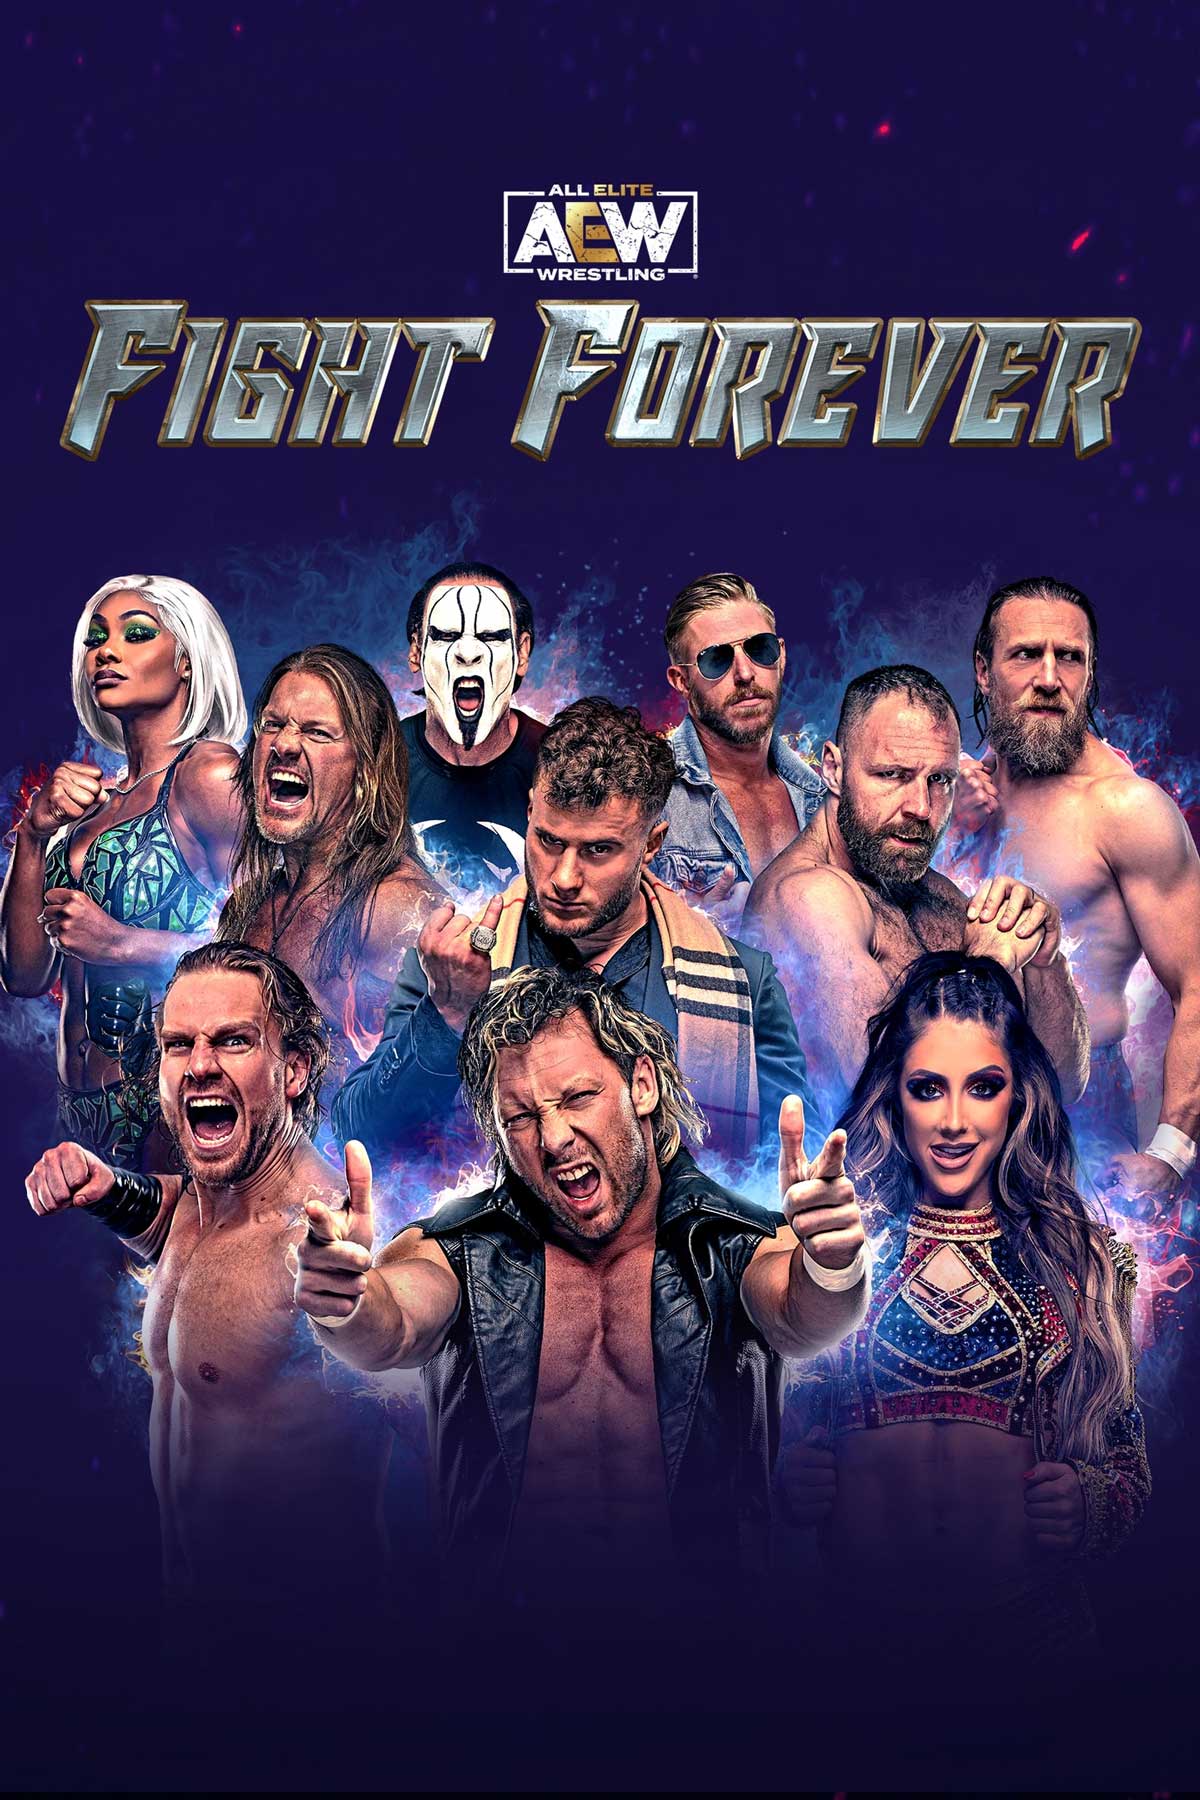 AEW: Fight Forever [PC, Цифровая версия] (Цифровая версия) цена и фото